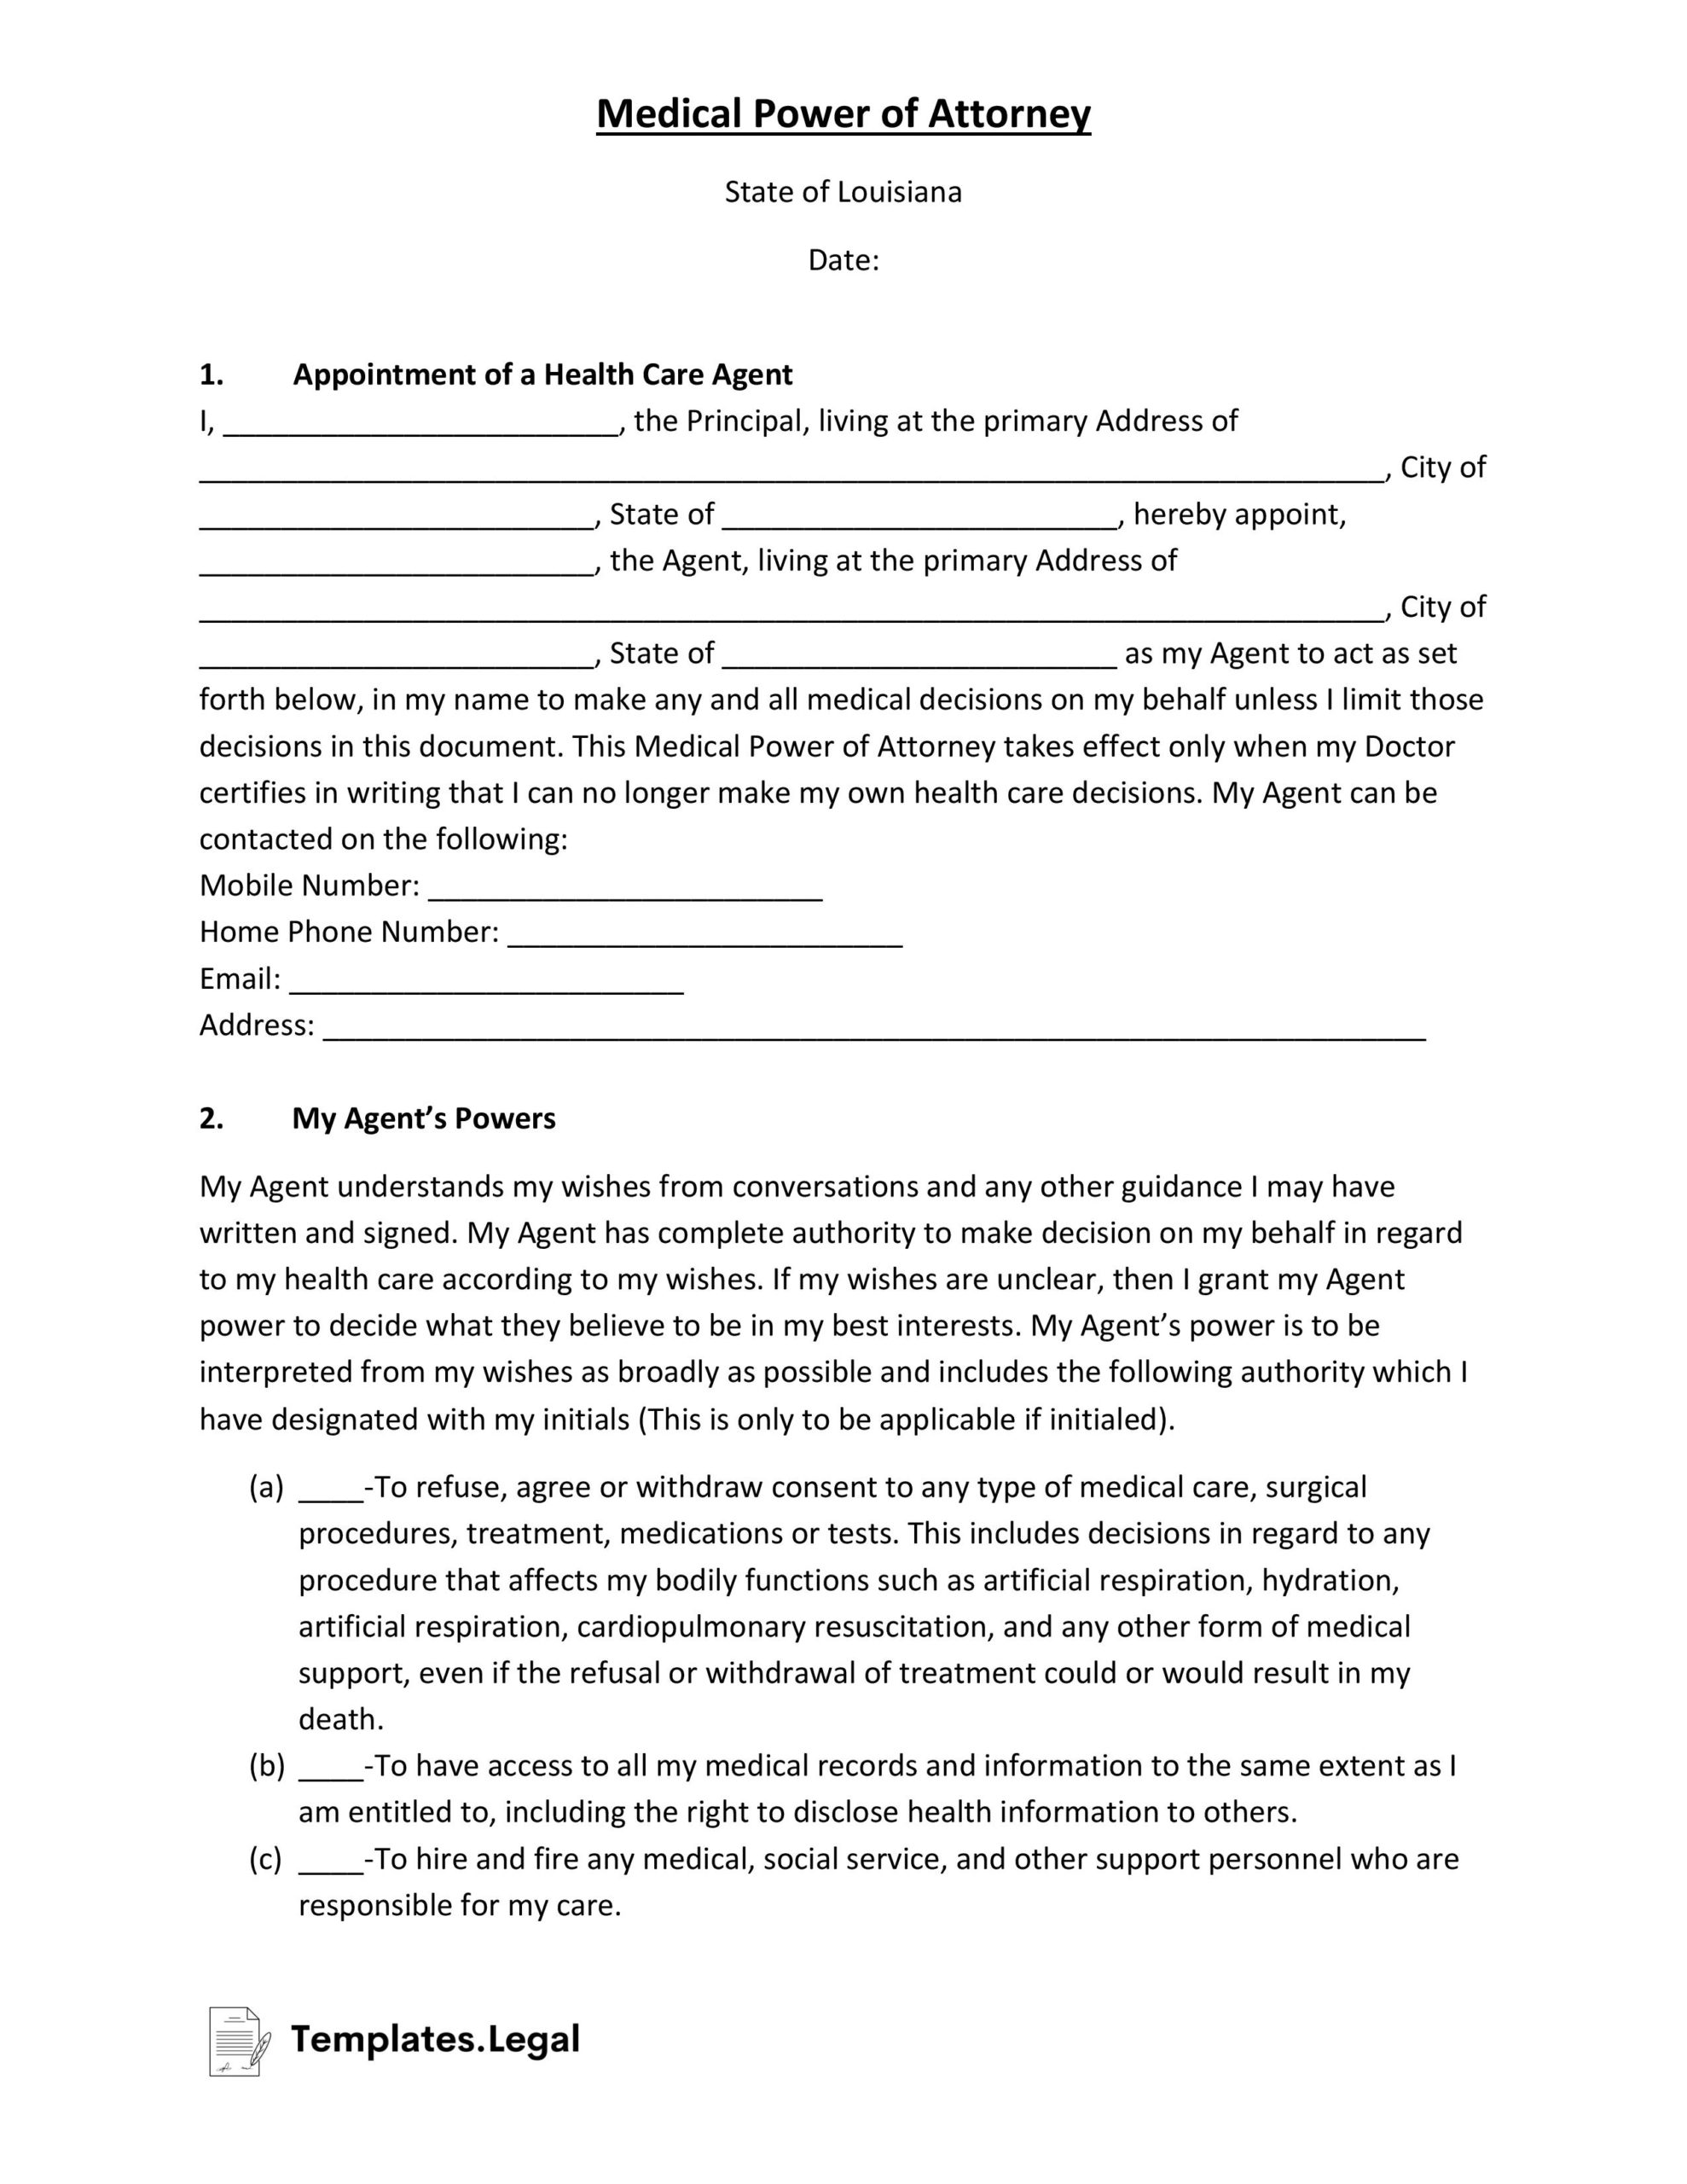 Louisiana Medical Power of Attorney- Templates.Legal